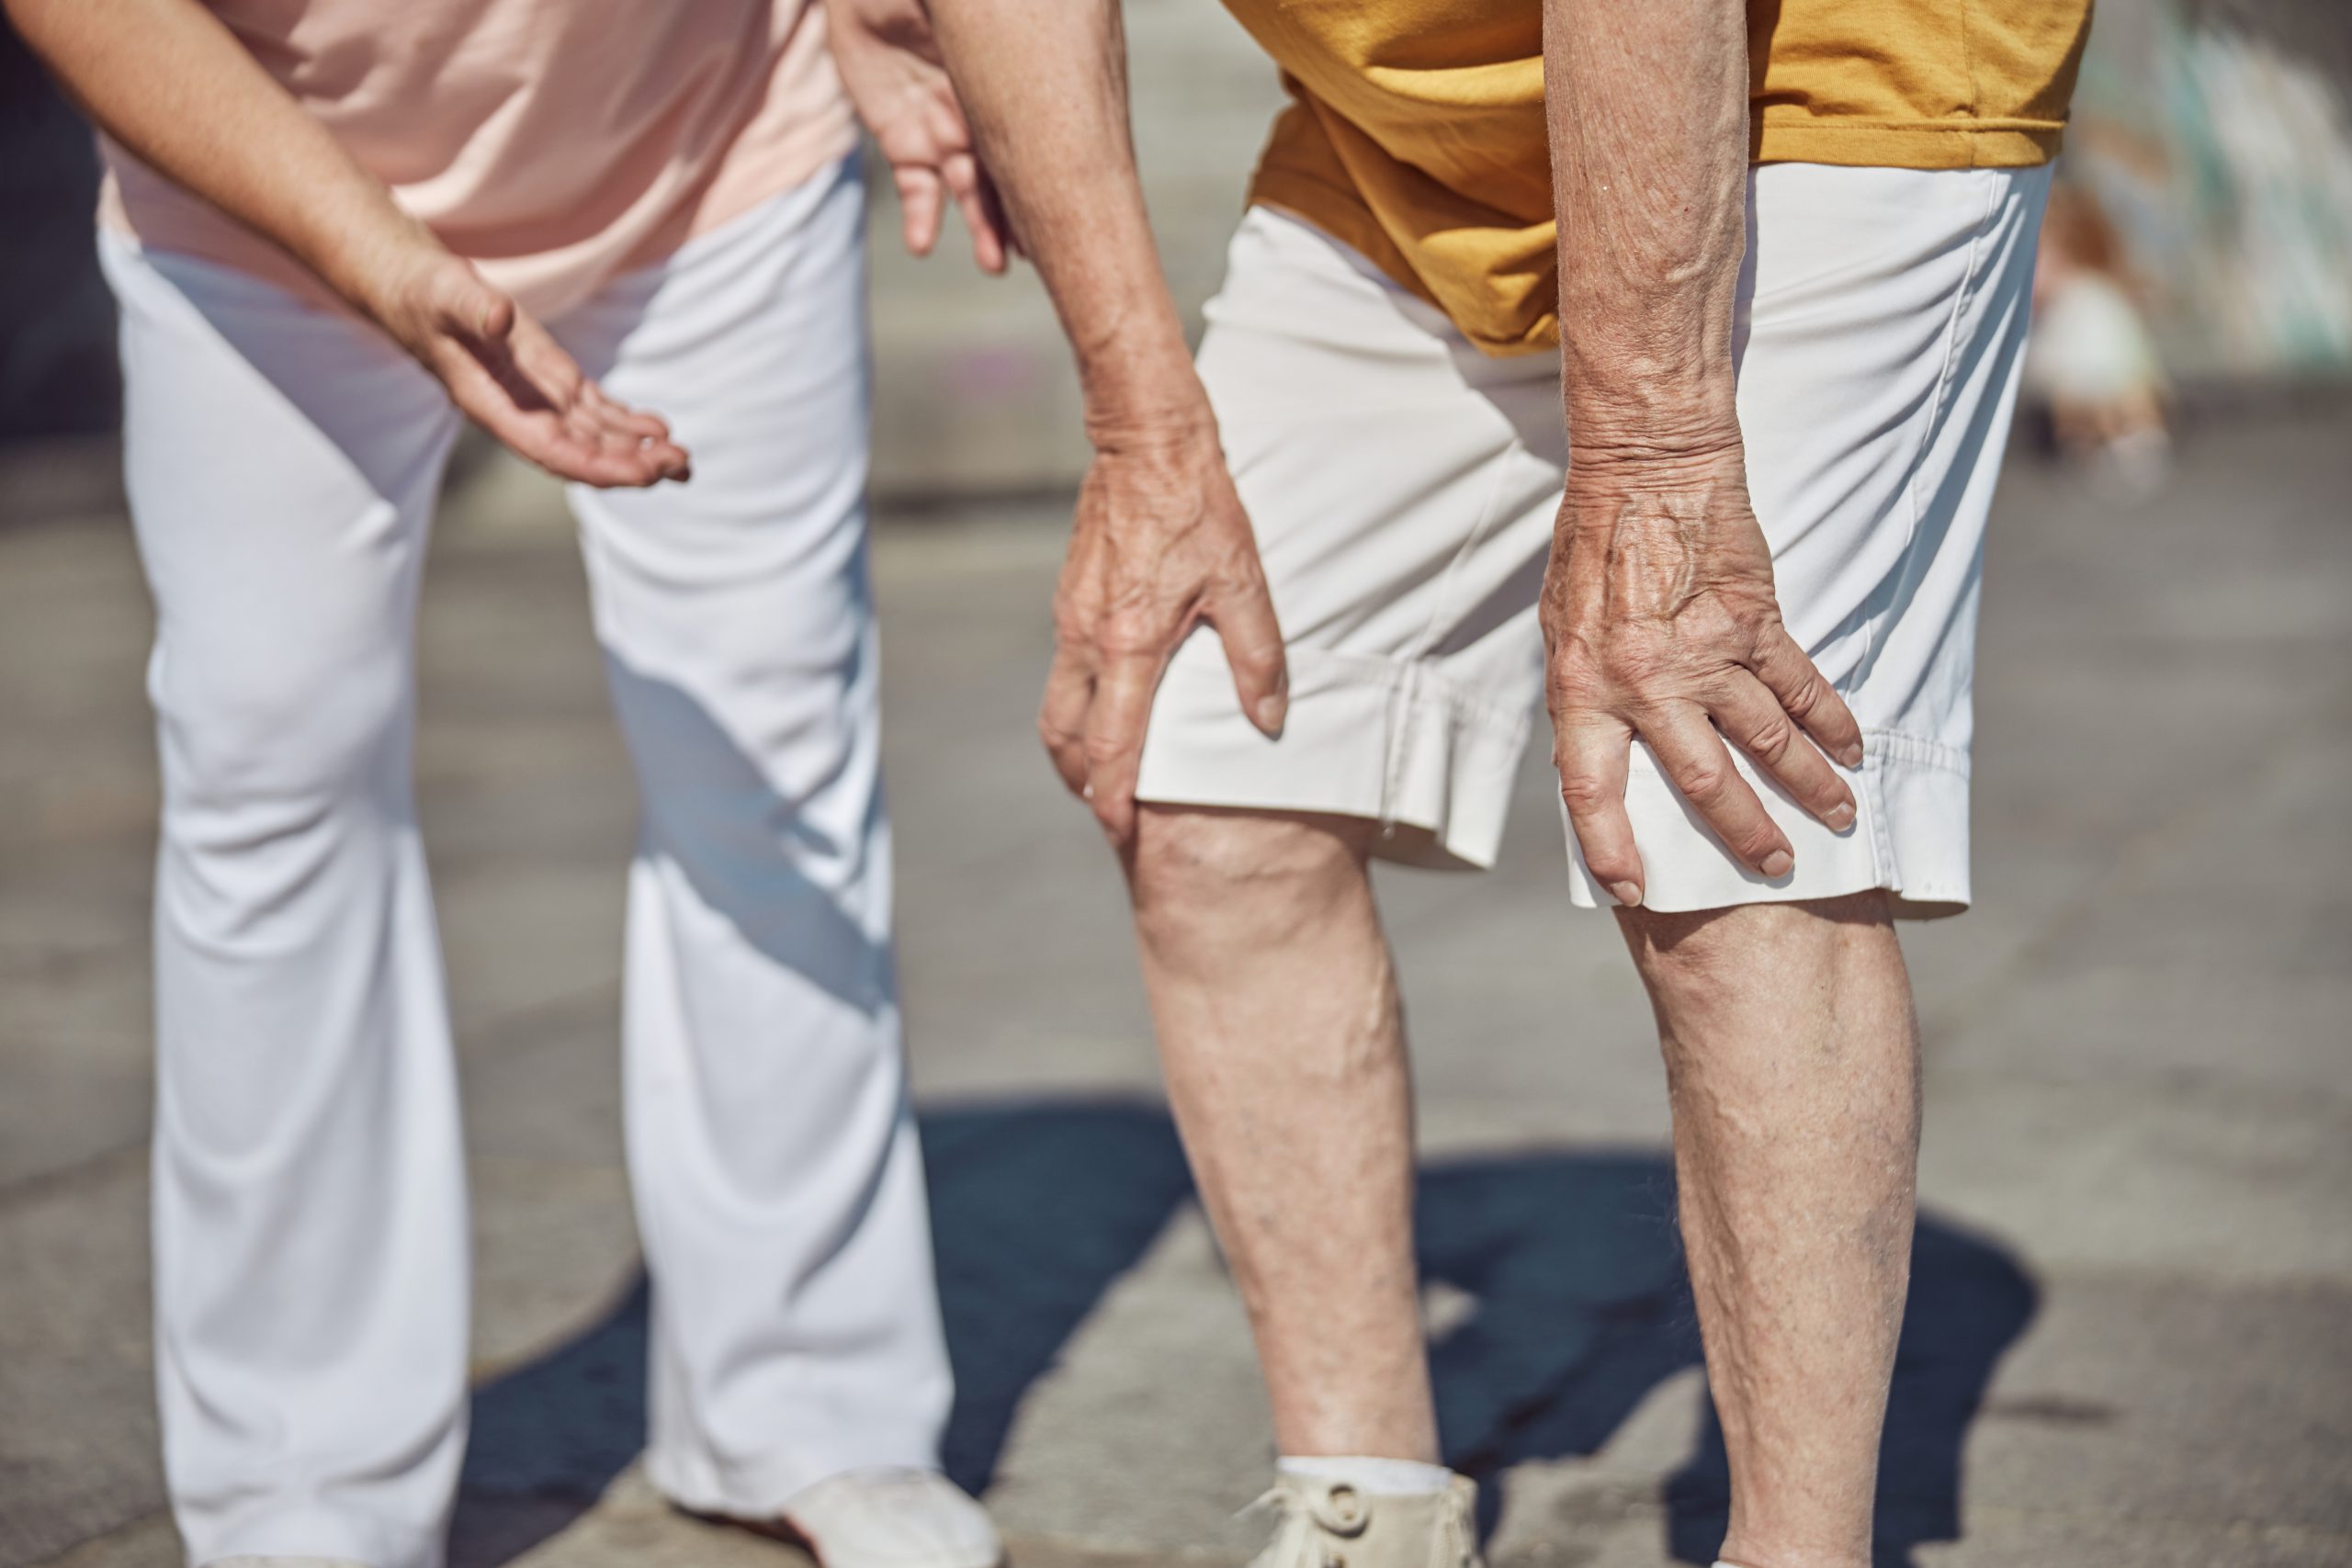 Guide on Caring for Your Knee Post-Knee Replacement